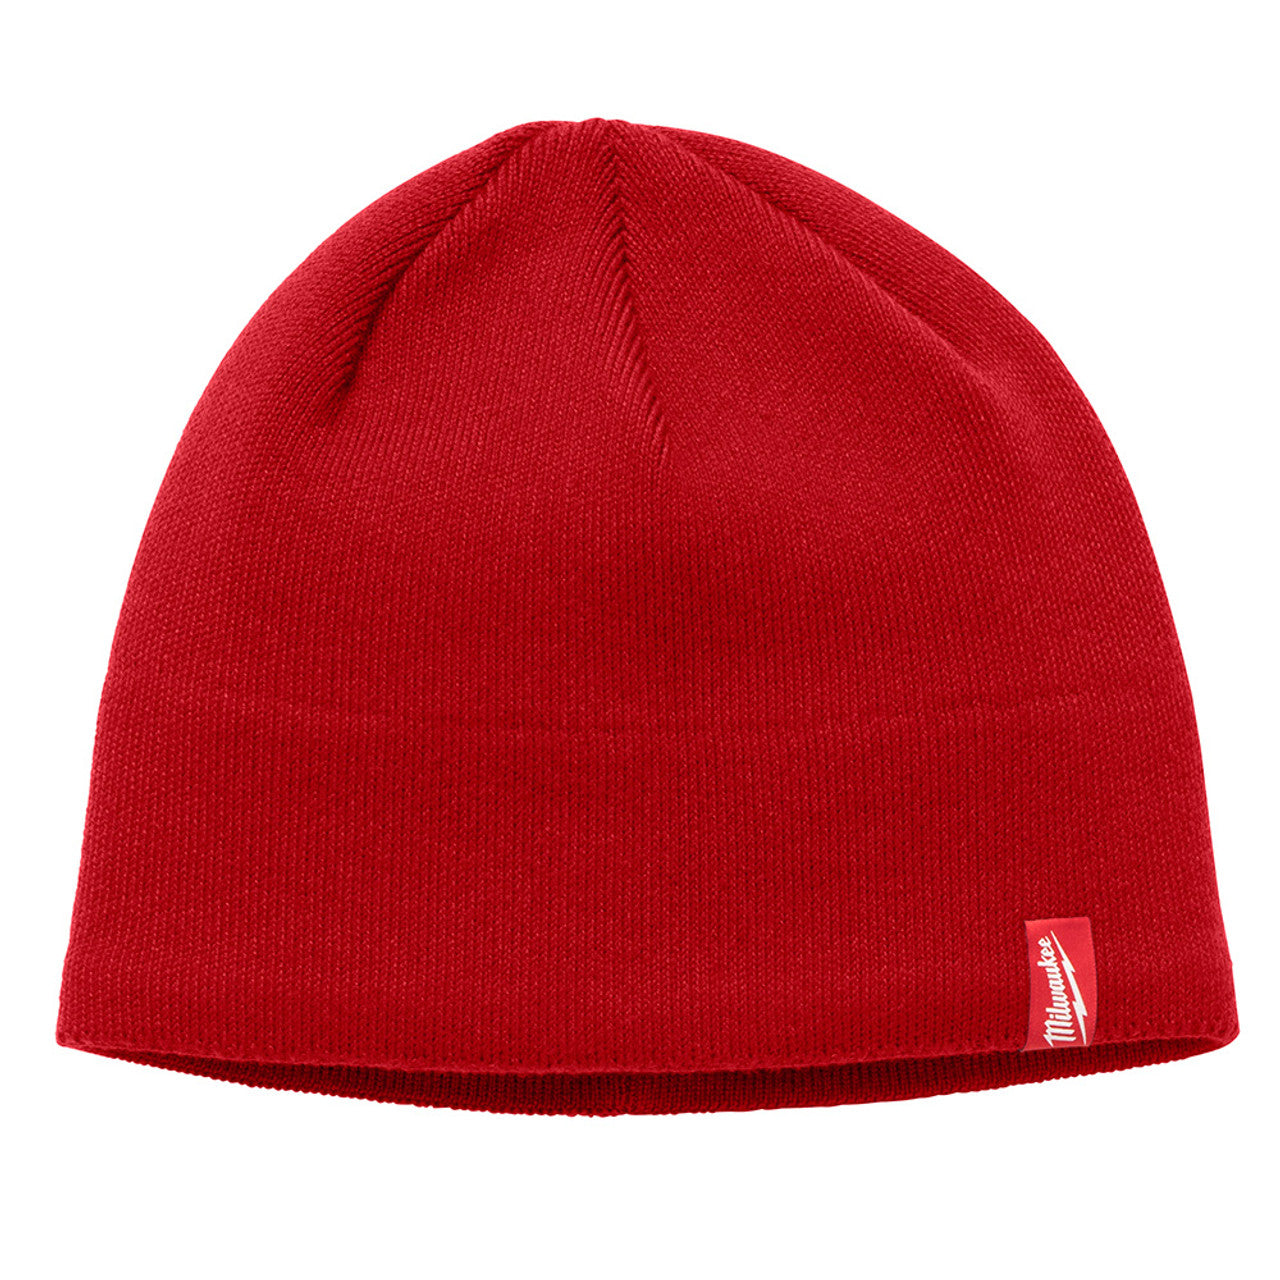 Milwaukee 502R Fleece Lined Knit Beanie, Red - MPR Tools & Equipment